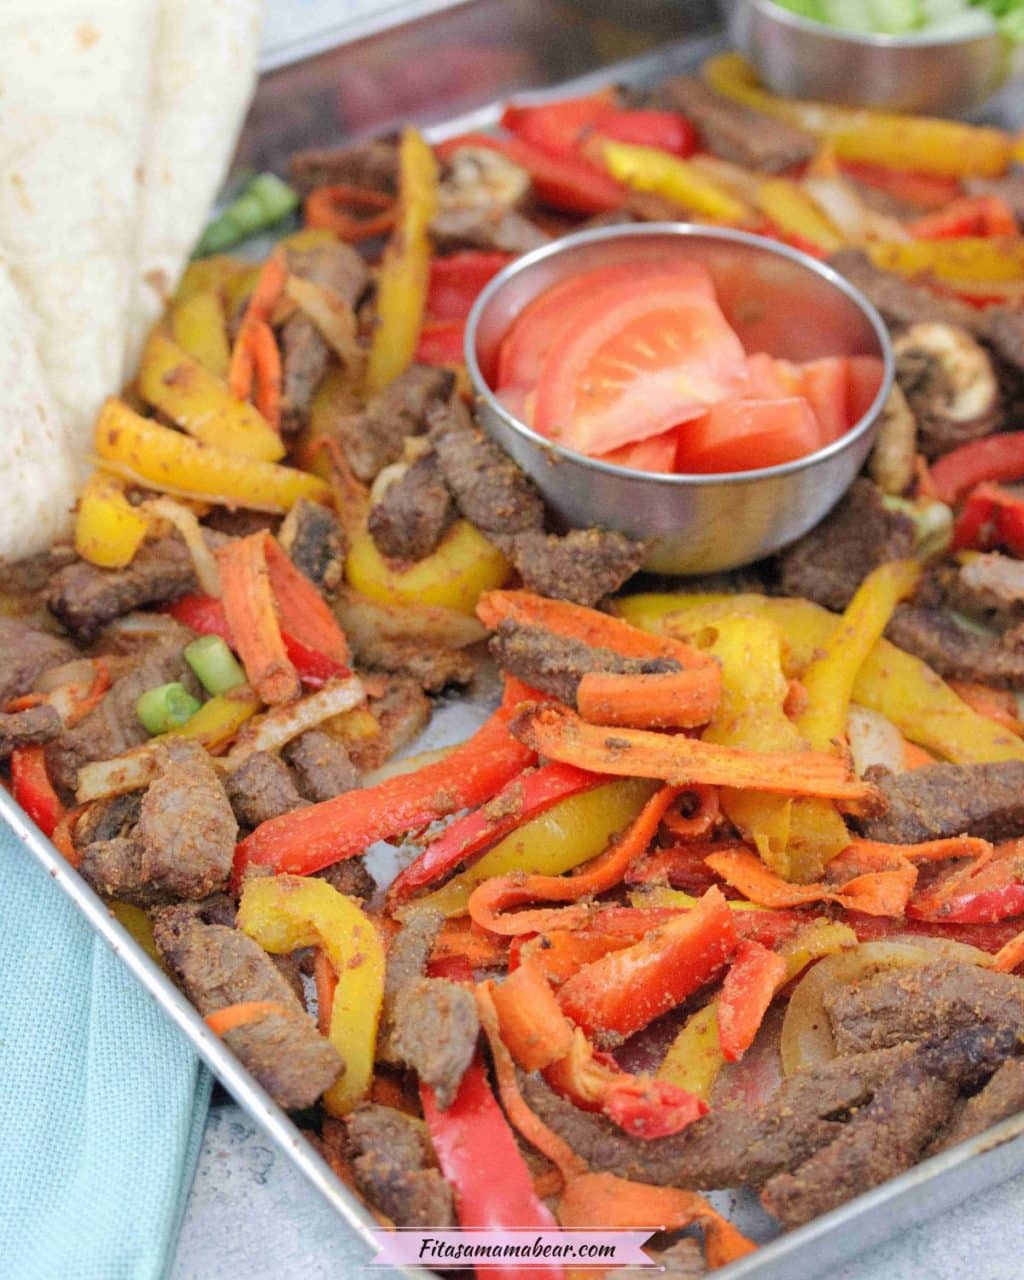 Baking tray with cooked steak, bell peppers, and veggies with a steel bowl of fresh tomatoes in the middle and flour tortillas folded to the side